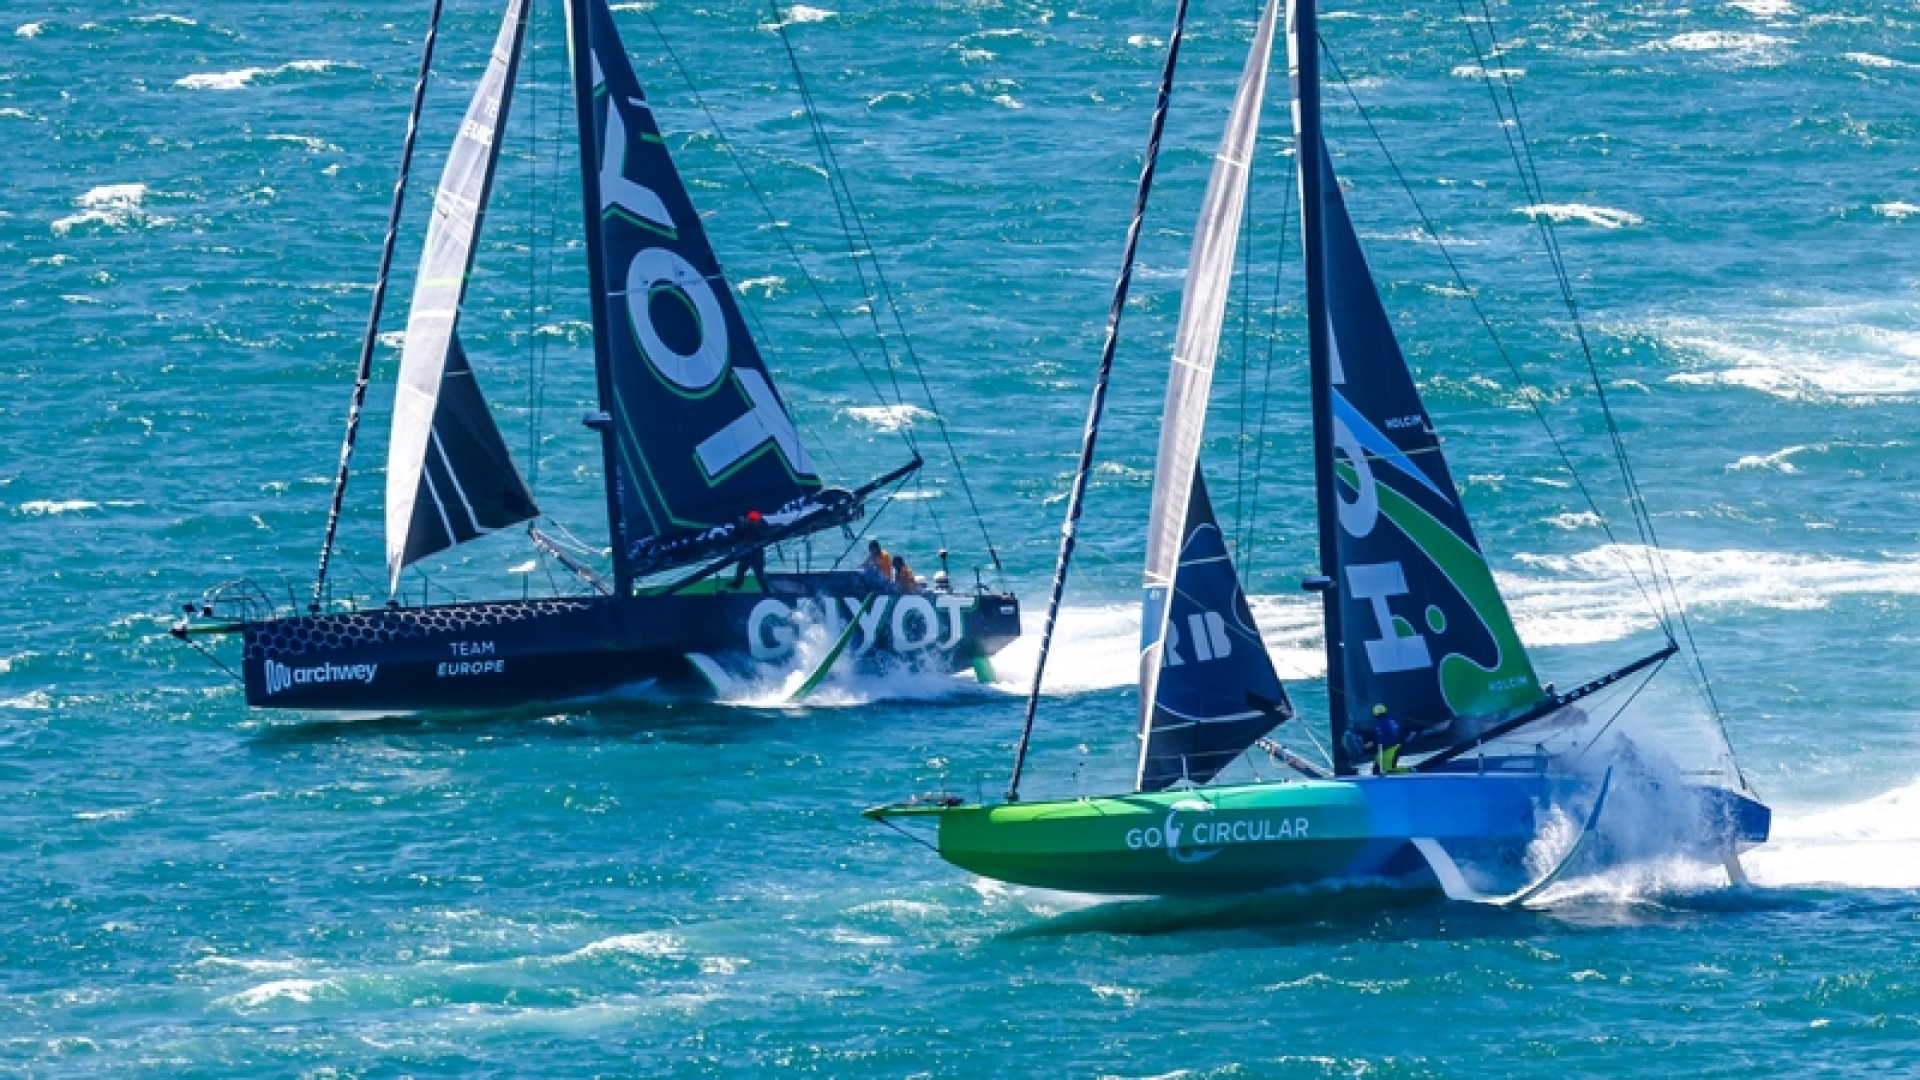 The Ocean Race 2022-23 - 26 February 2023, Start of Leg 3 in Cape Town. GUYOT environnement - Team Europe and Team Holcim - PRB.
© Sailing Energy / The Ocean Race